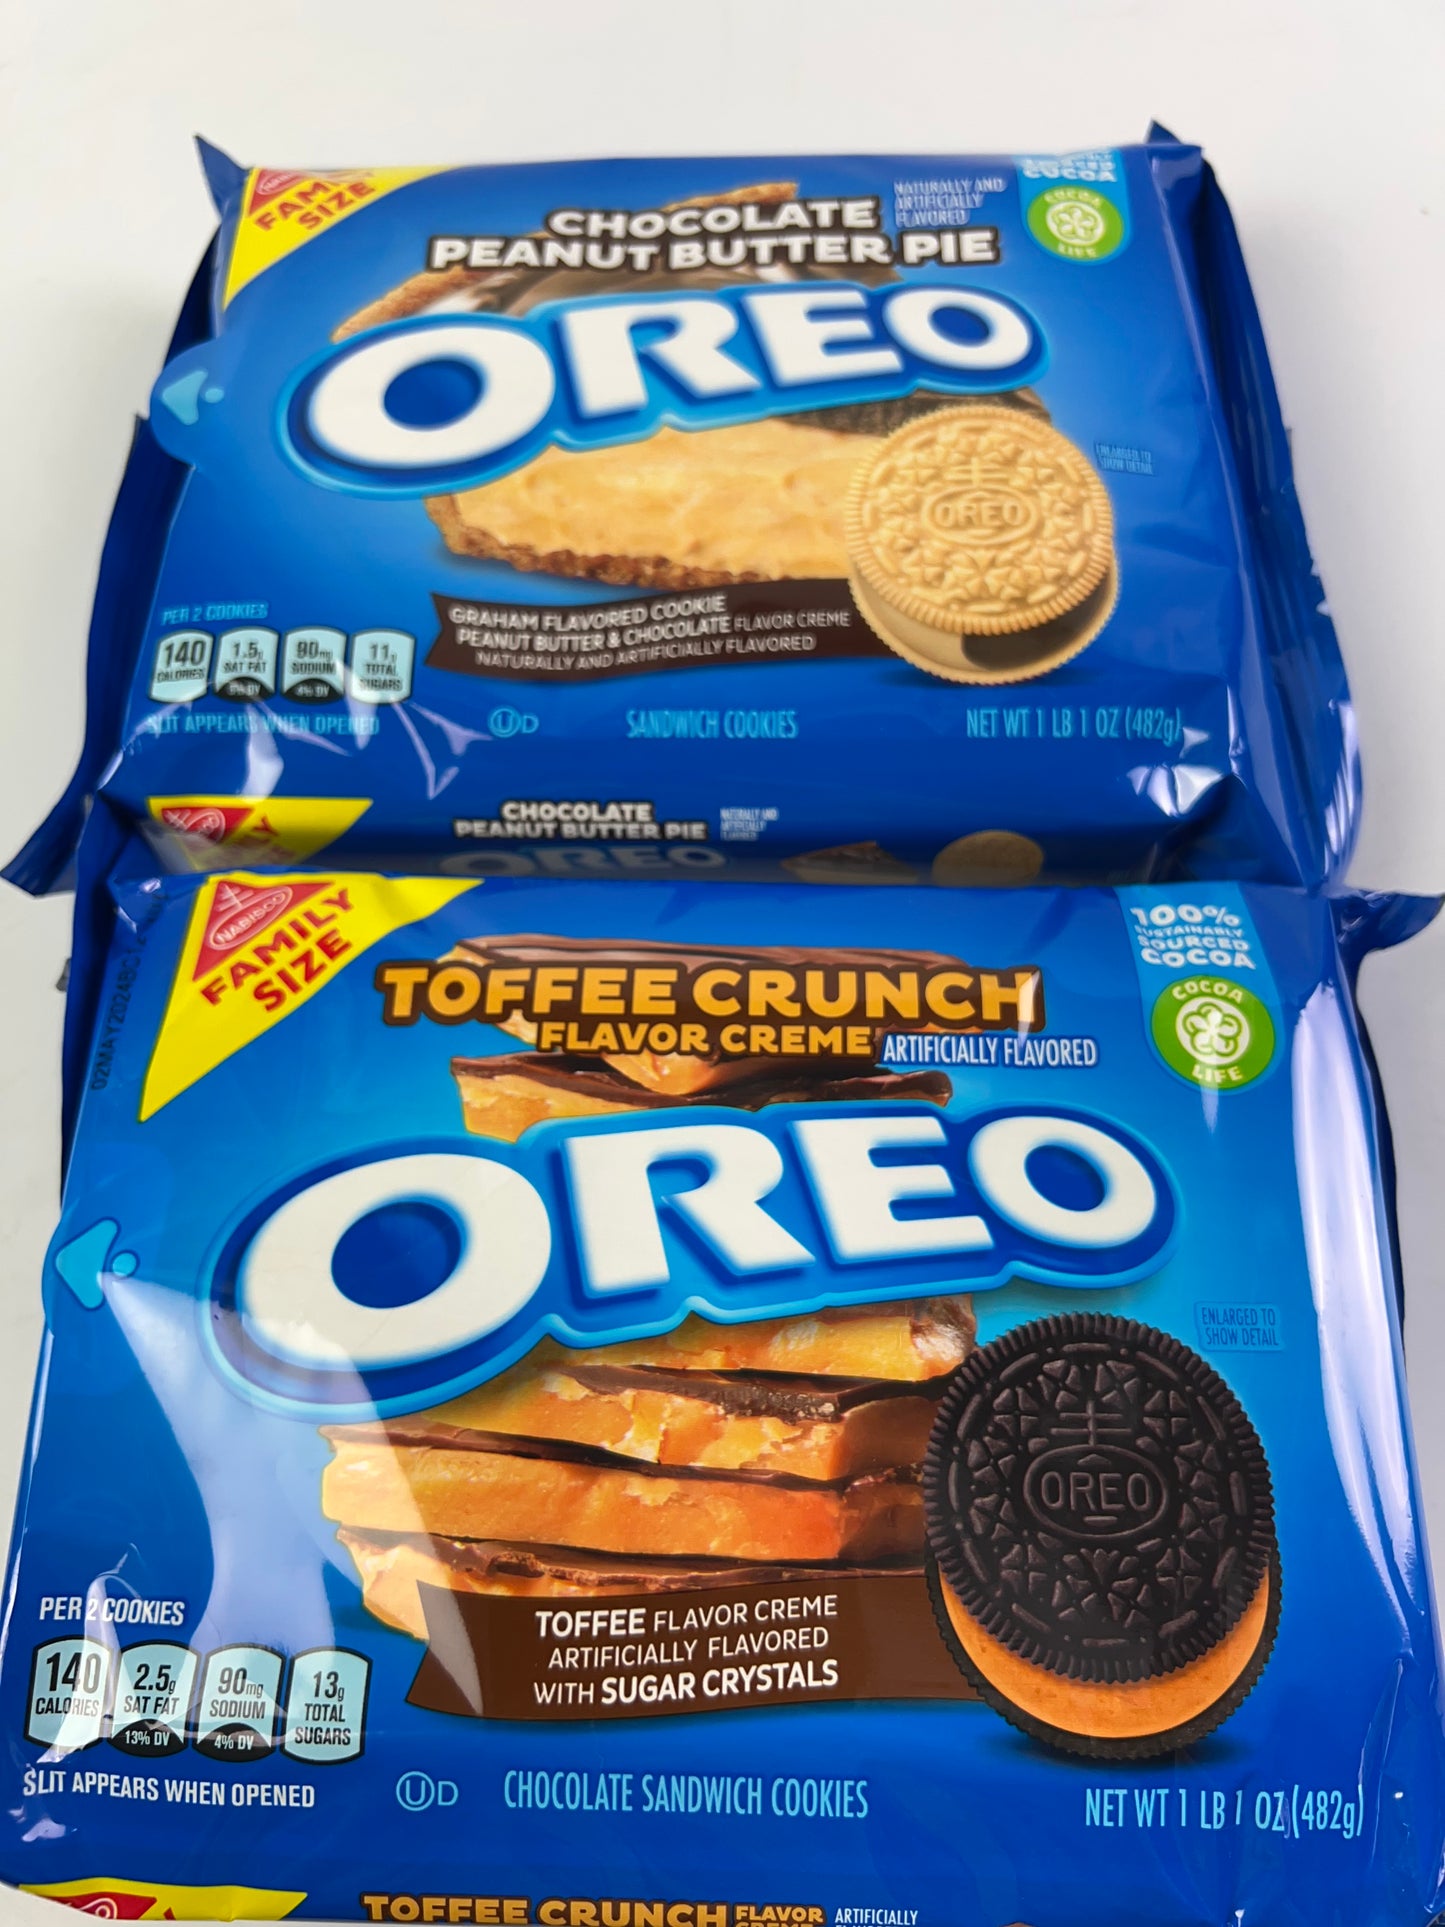 OREO Chocolate Peanut Butter Pie/ Toffee Crunch Sandwich Cookies, Family Size, 17 oz